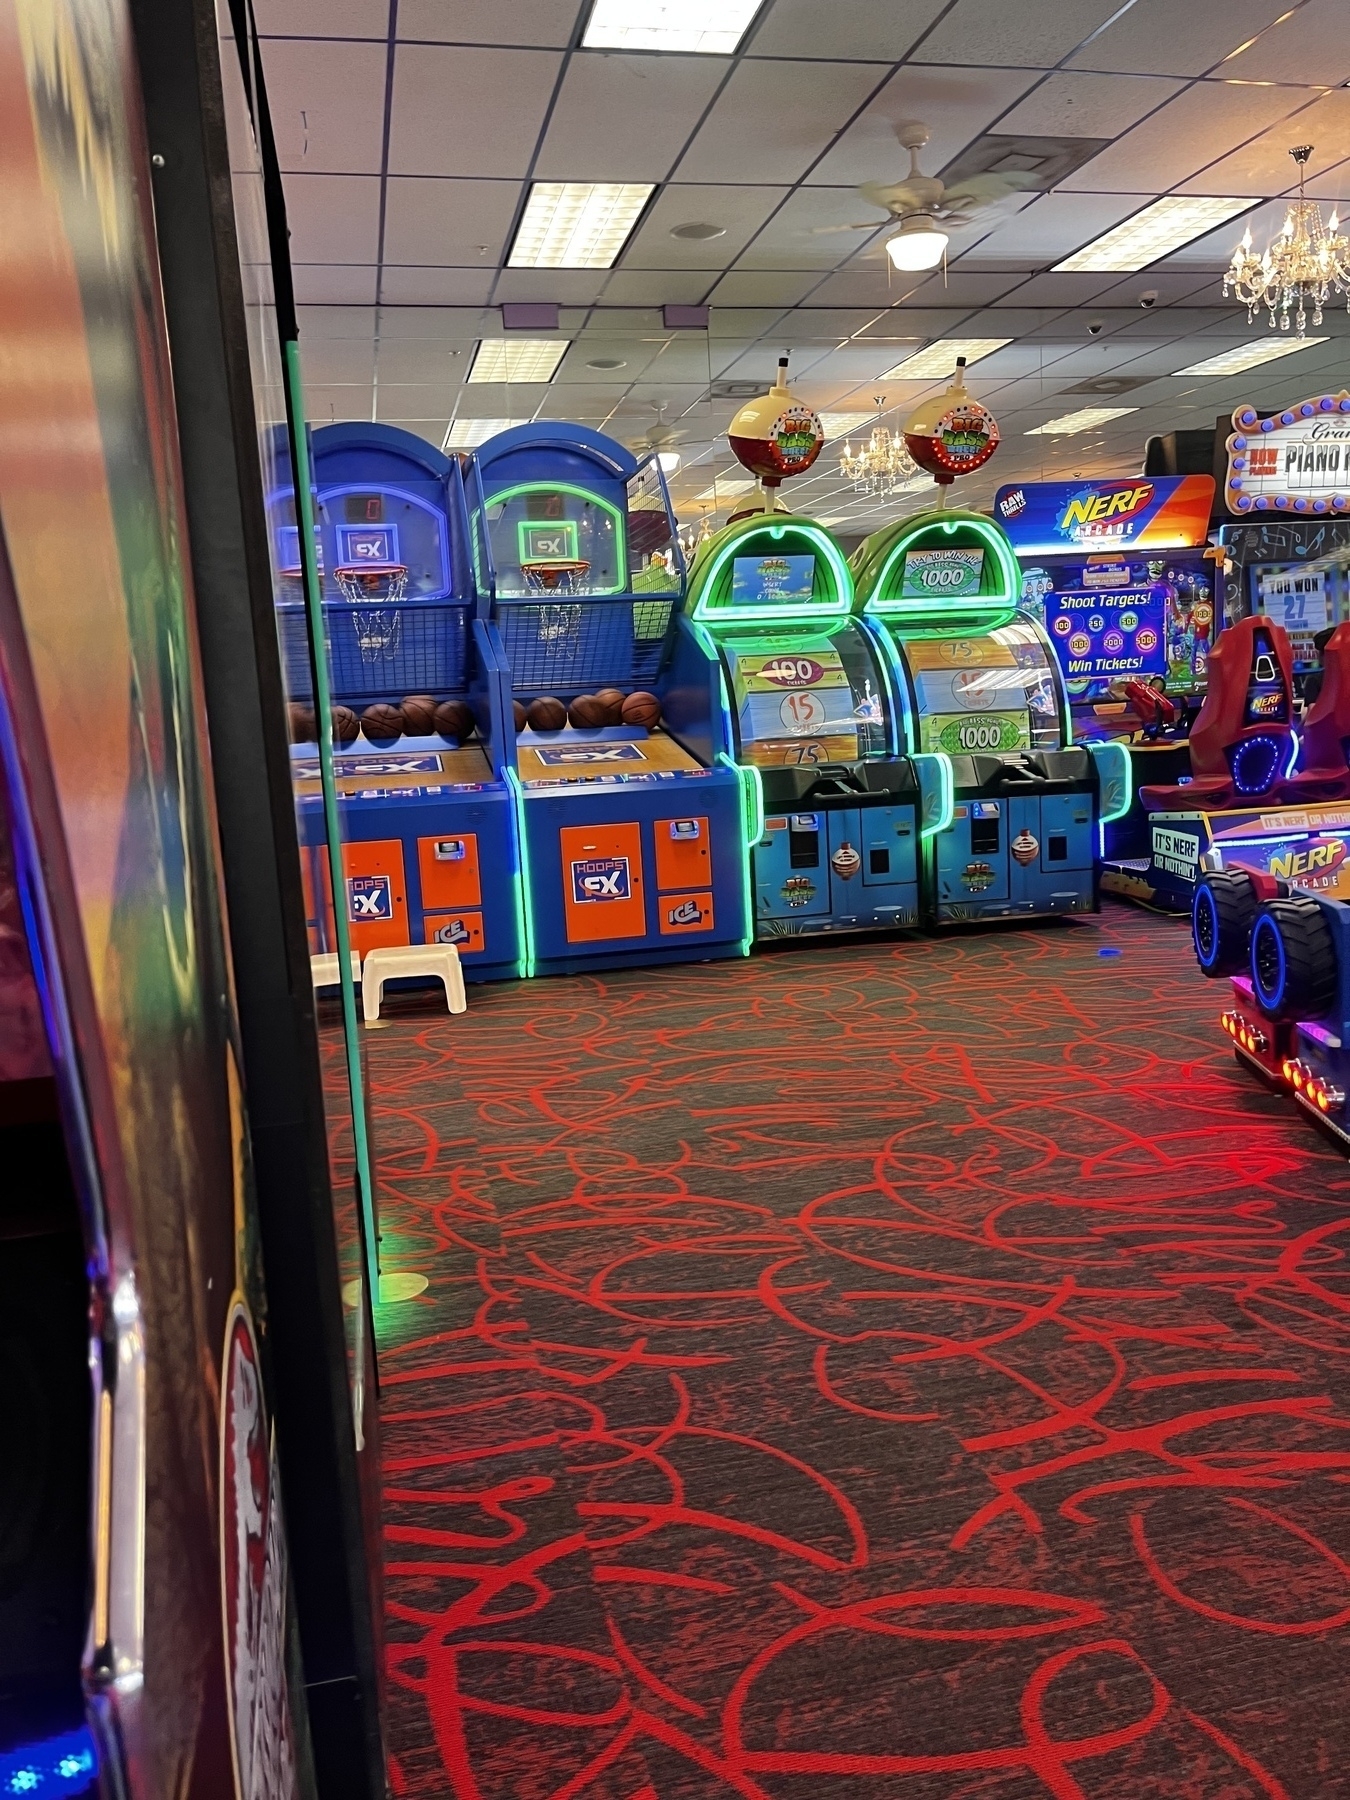 An amusement arcade with a variety of brightly lit games